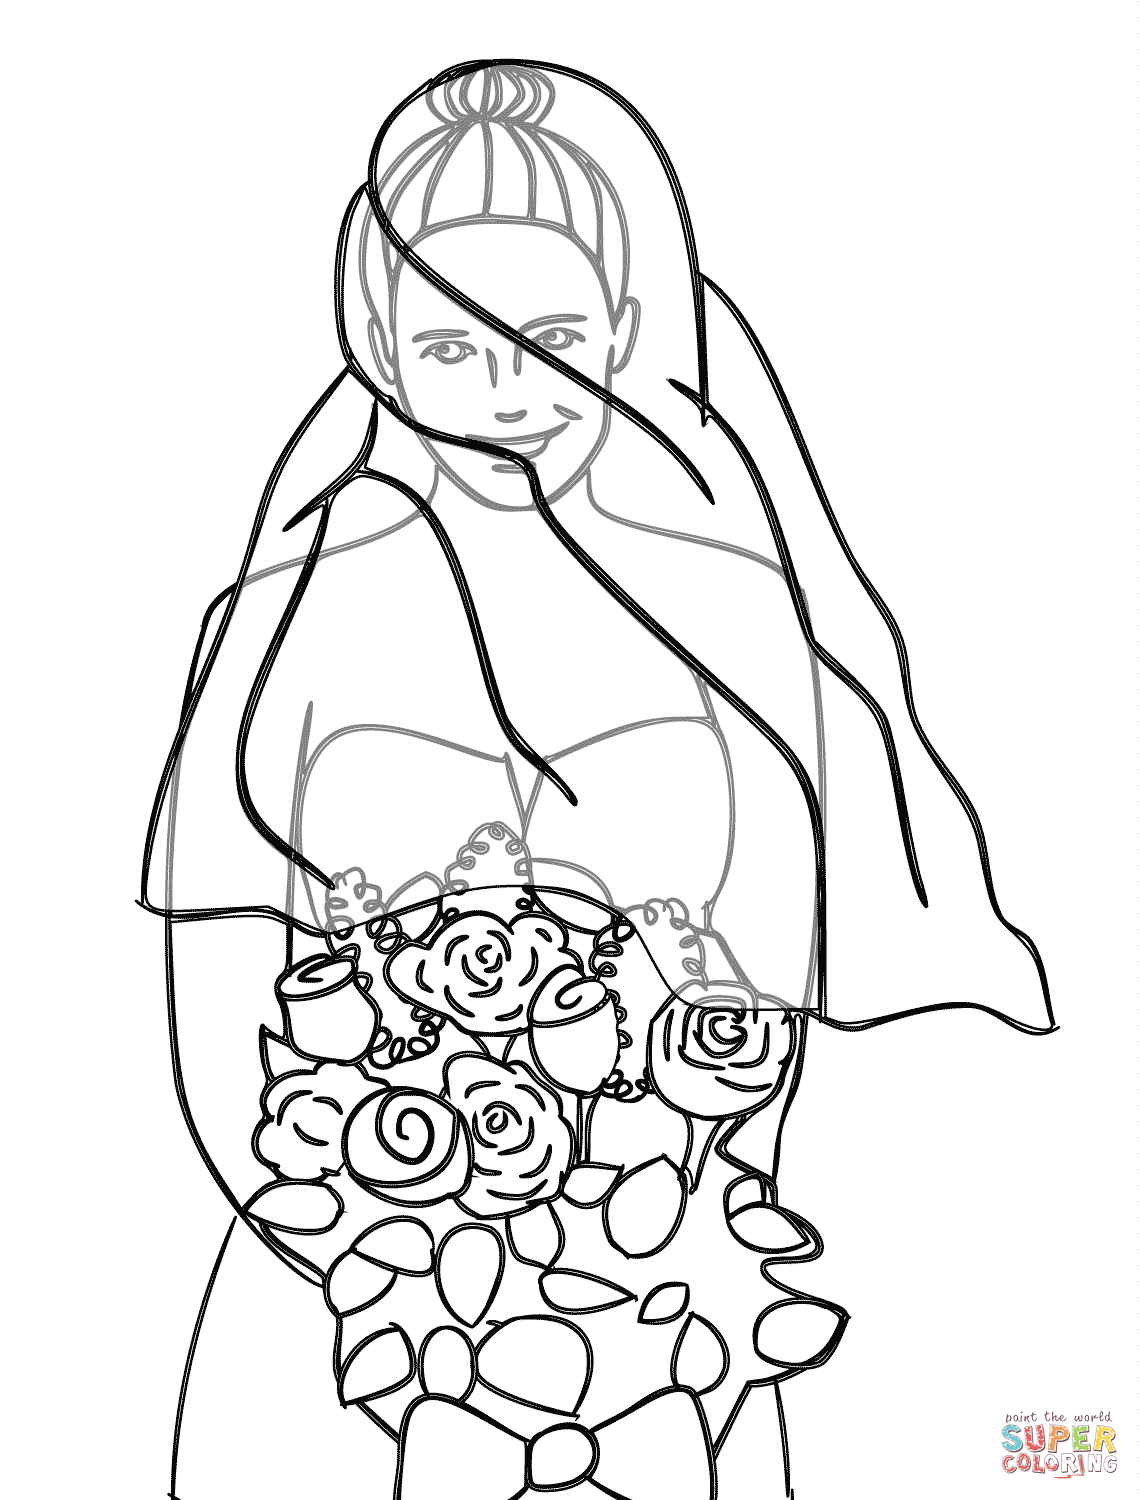 Wedding Dress Coloring Pages - Coloring Home